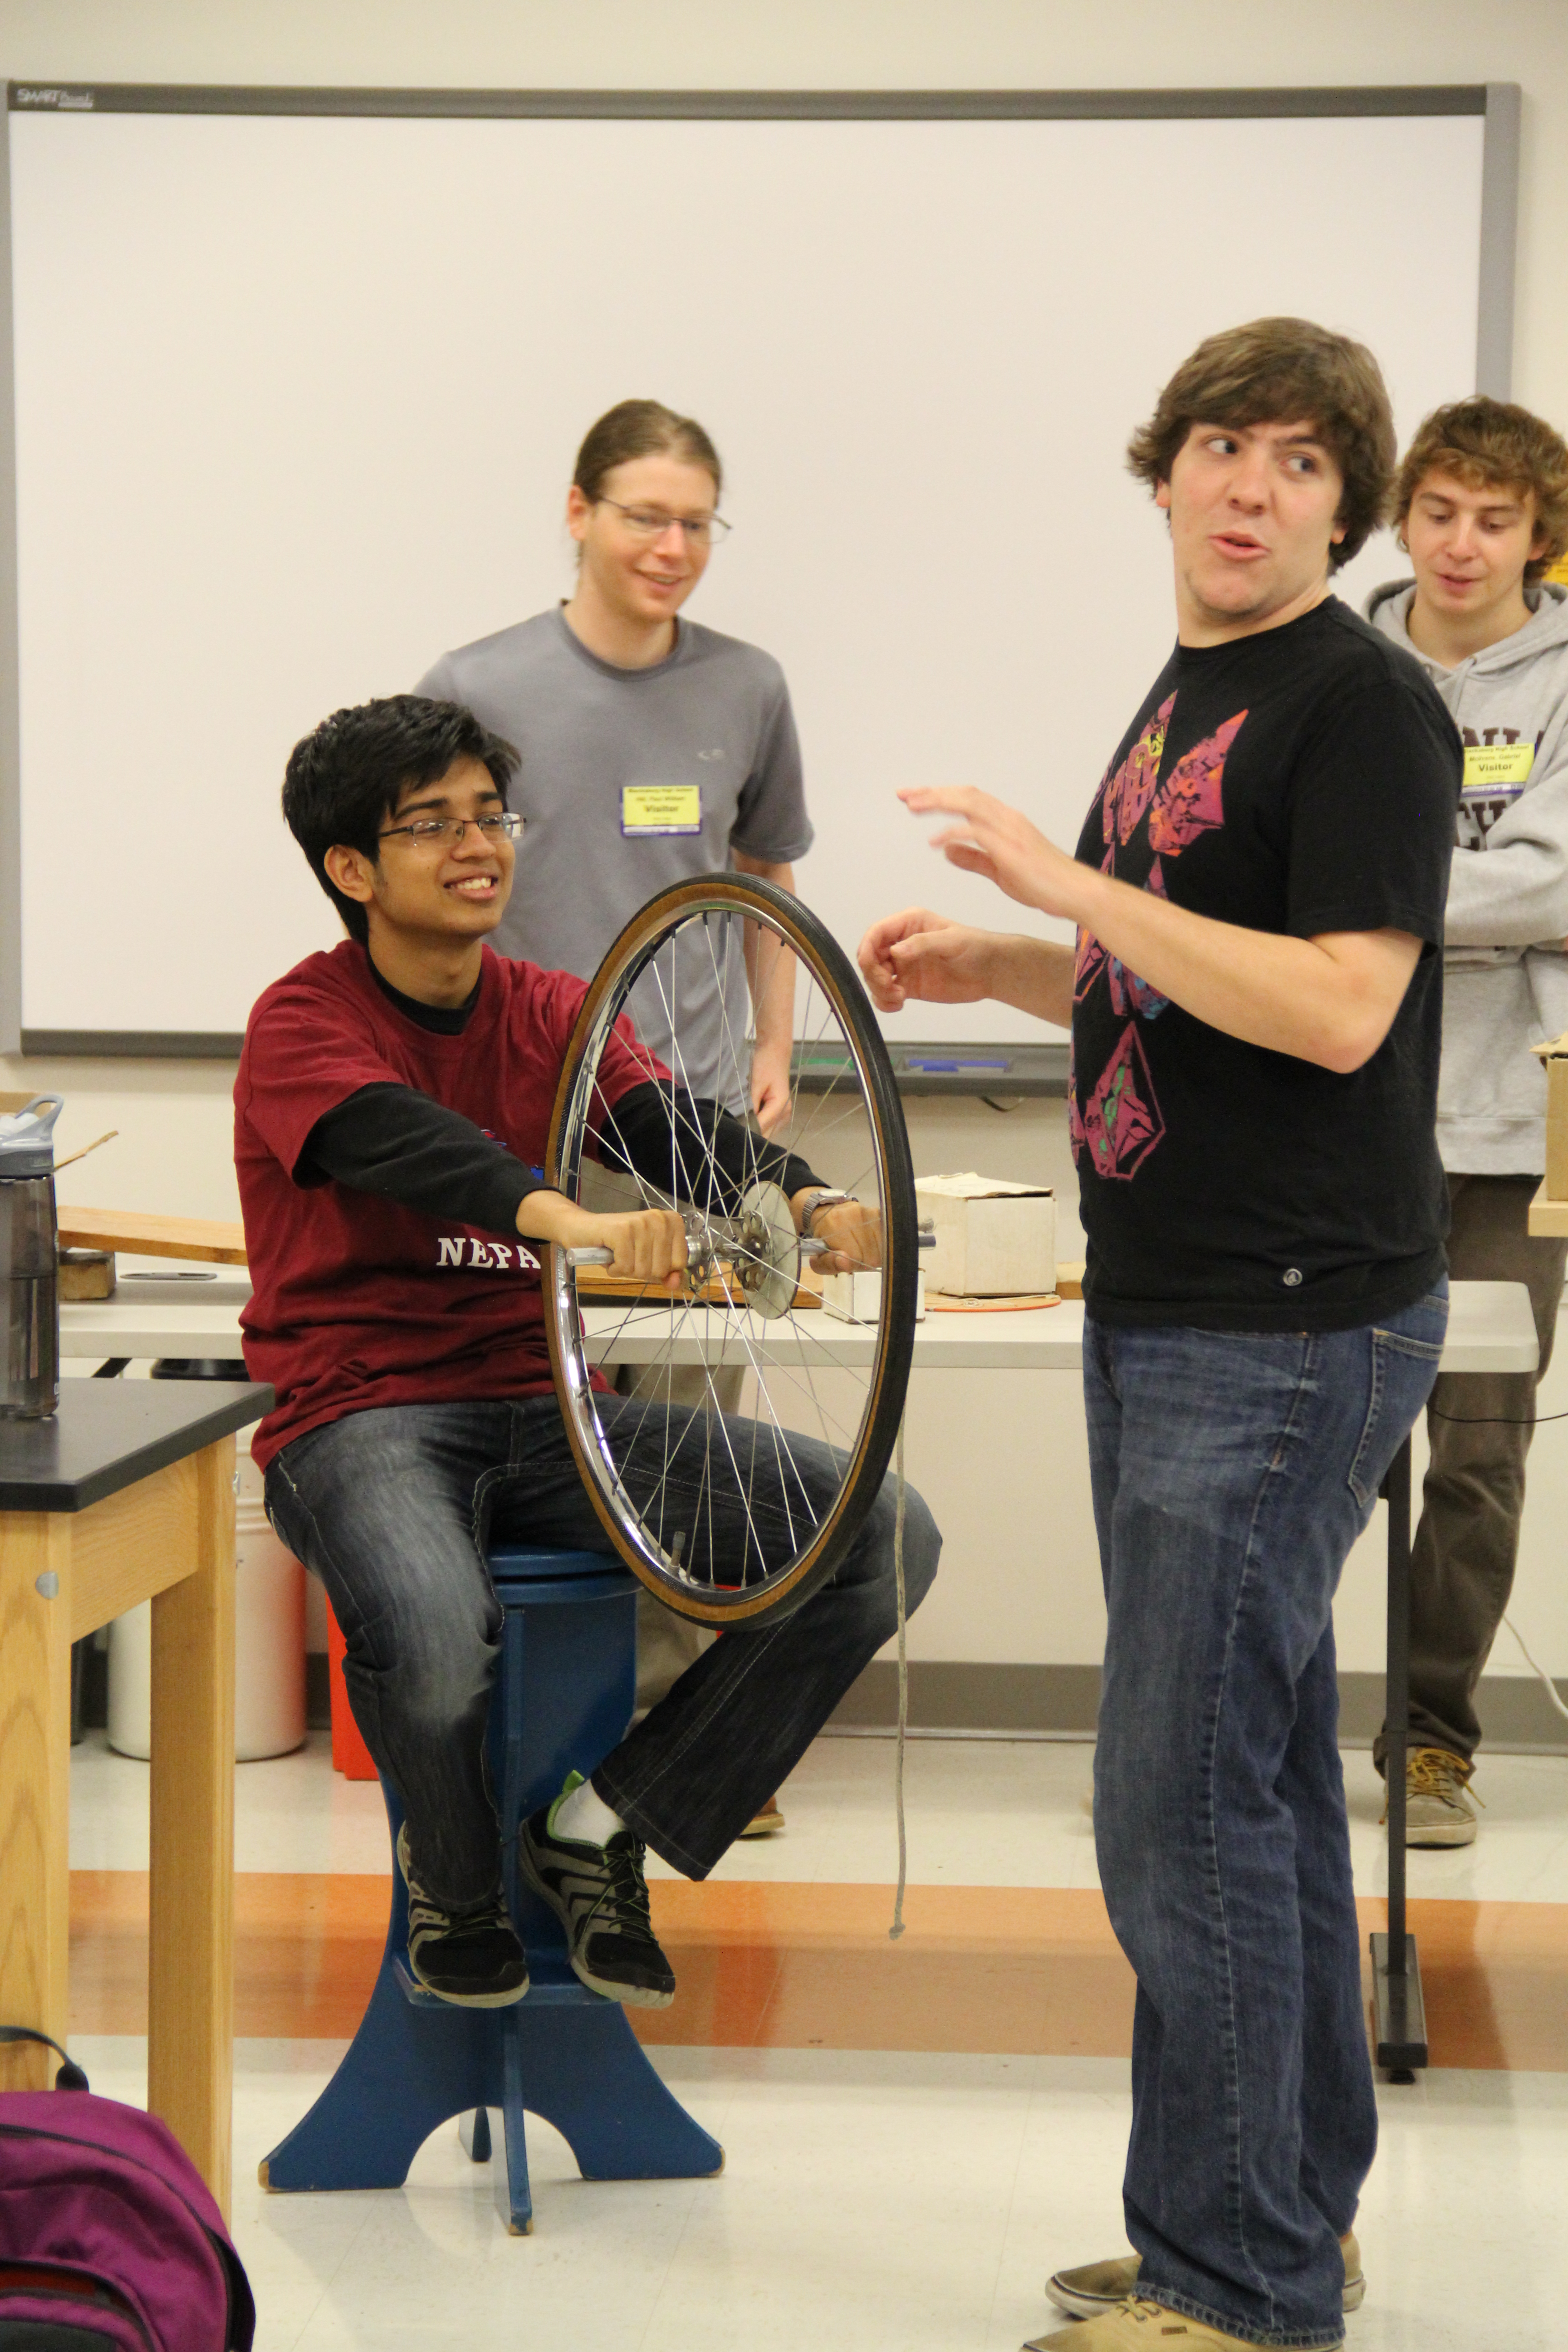 Outreach students Paul, Will, and Gabe showing a Blacksburg High School student how a bicycle wheel transfers angular momentum when turned